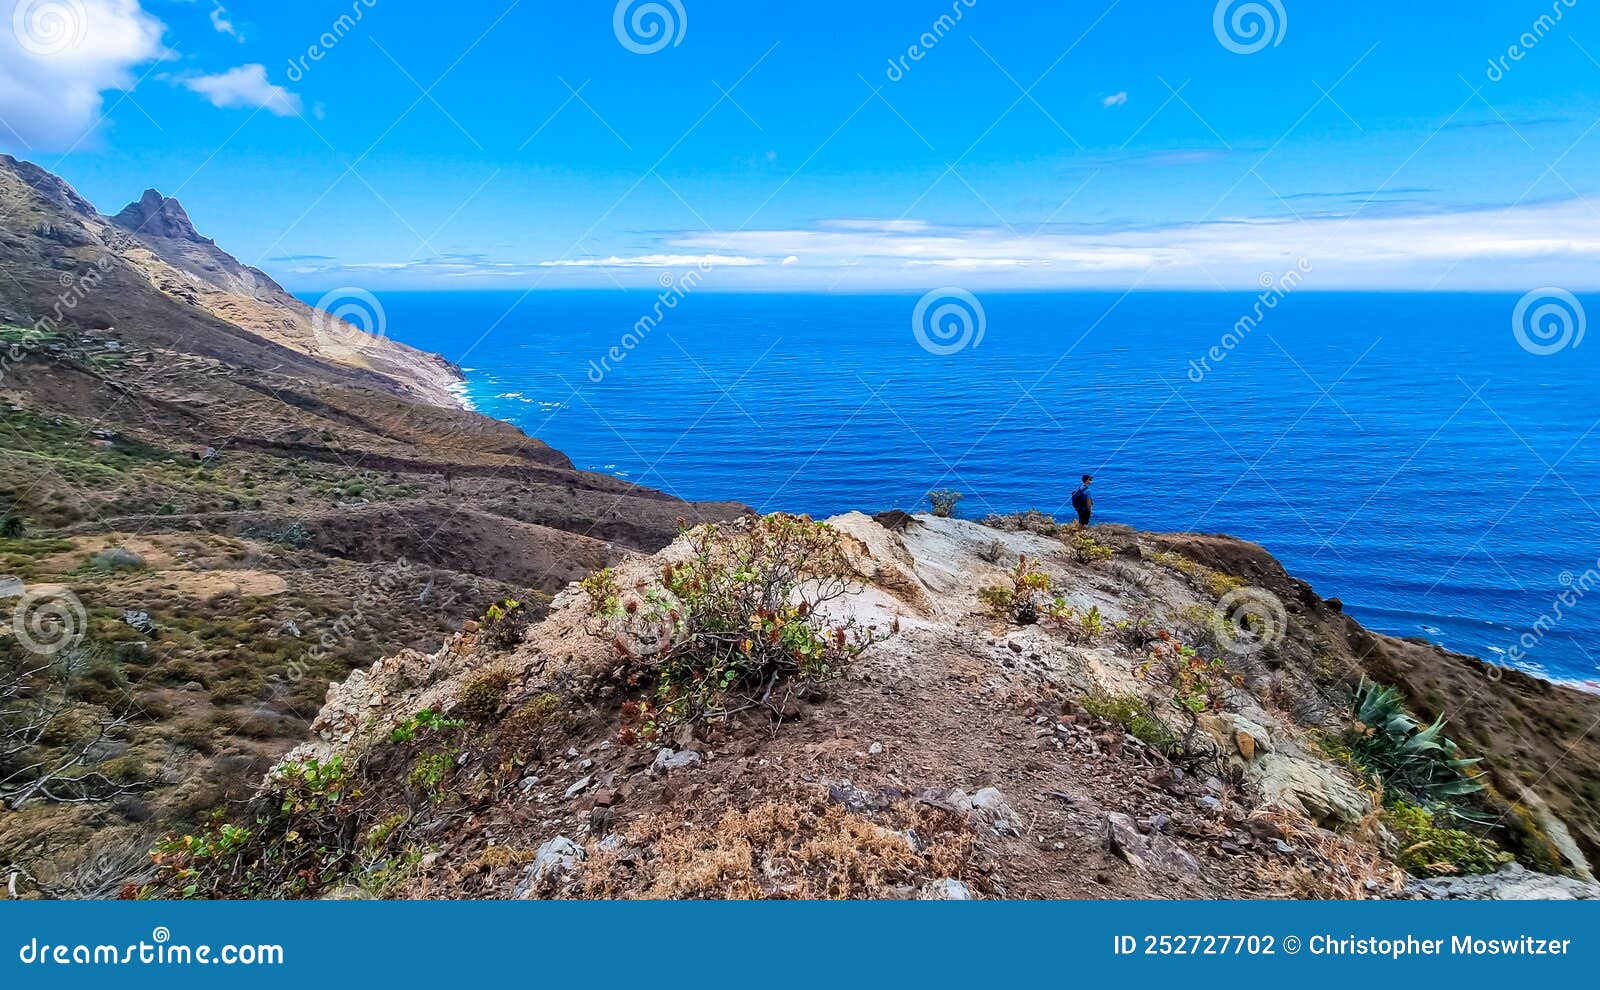 hiking man with scenic view of coastline of anaga mountain range on tenerife, canary islands, spain. view on cabezo el tablero